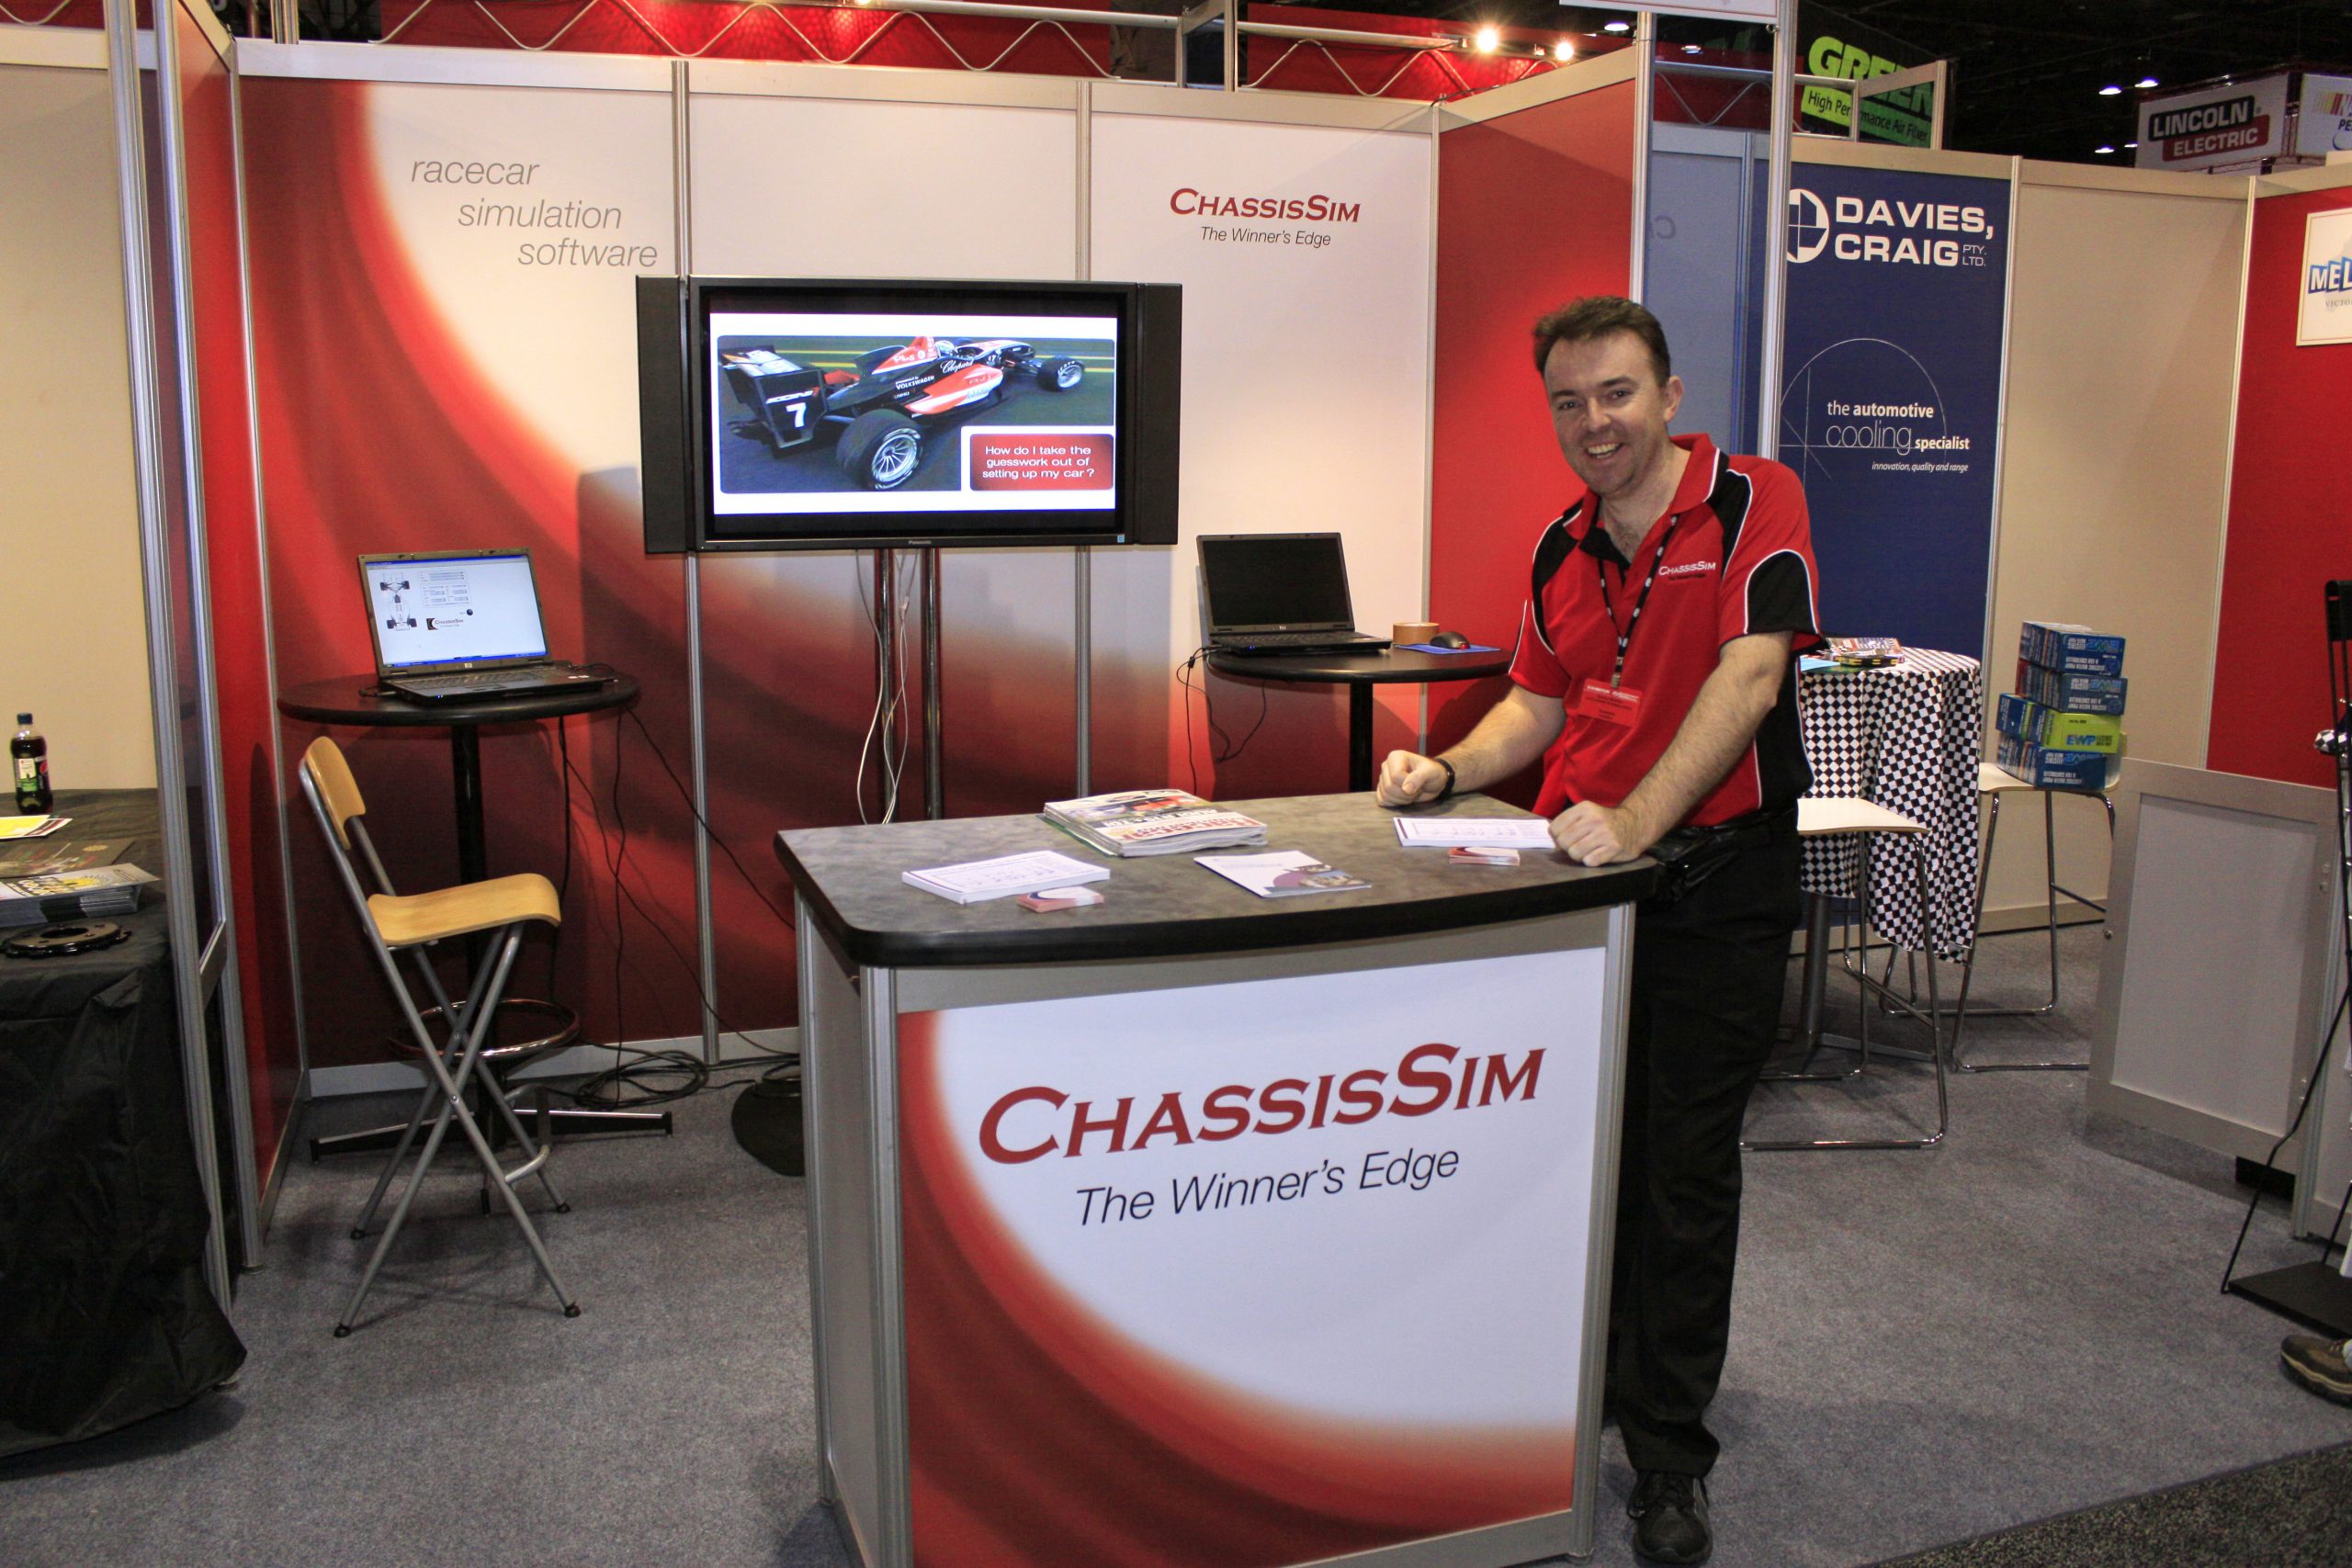 ChassisSim is exhibiting at PMW and PRI 2022